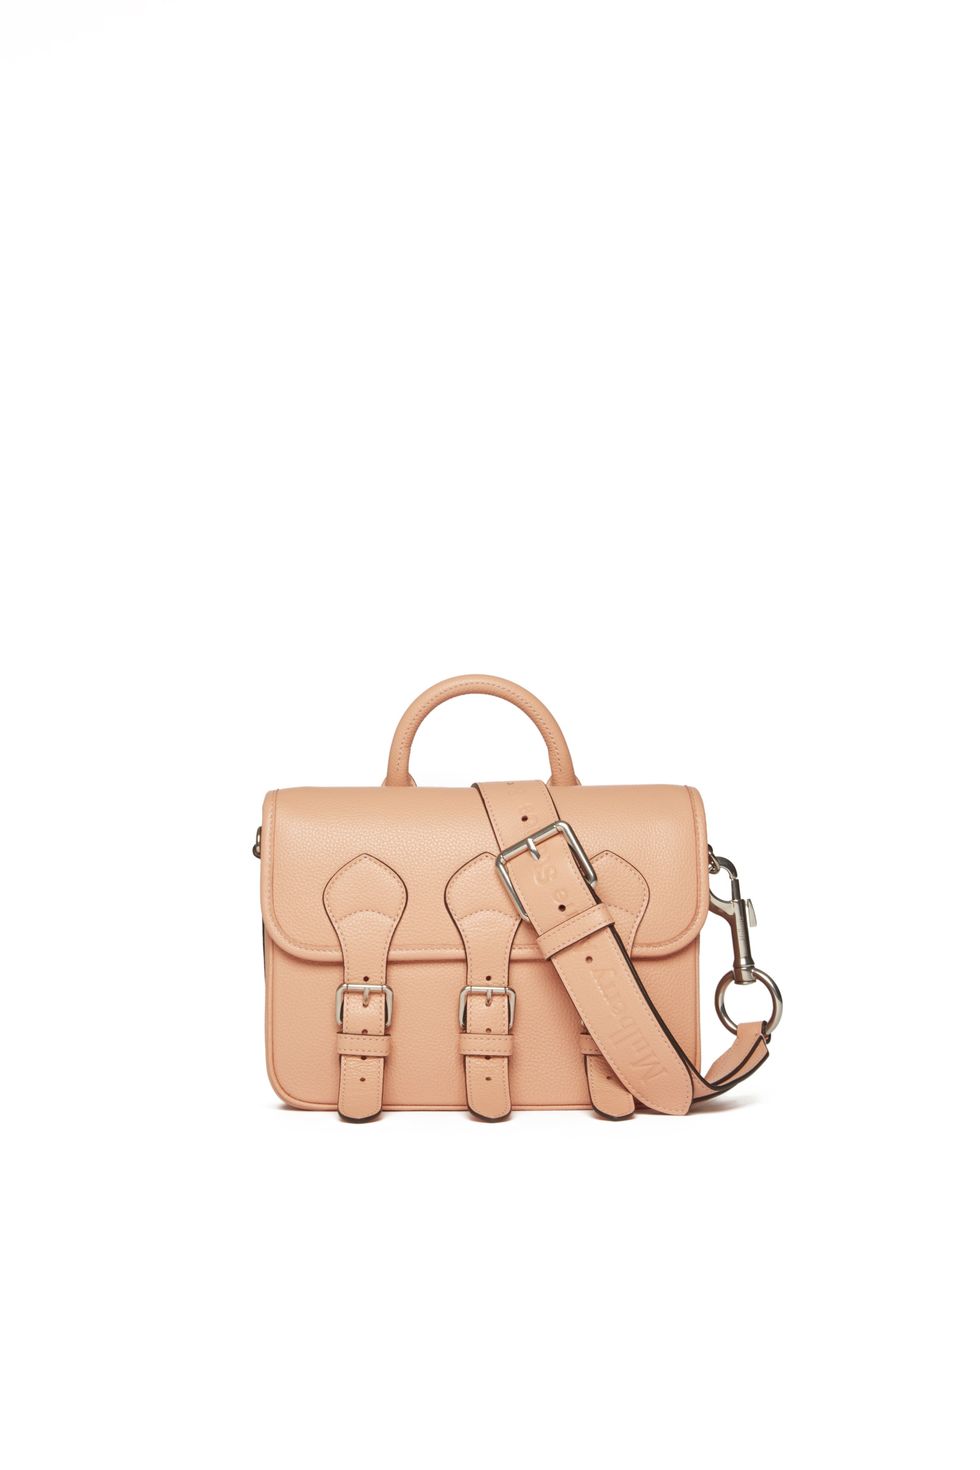 Mulberry & Acne Studios Messenger Pink Small Classic Grain